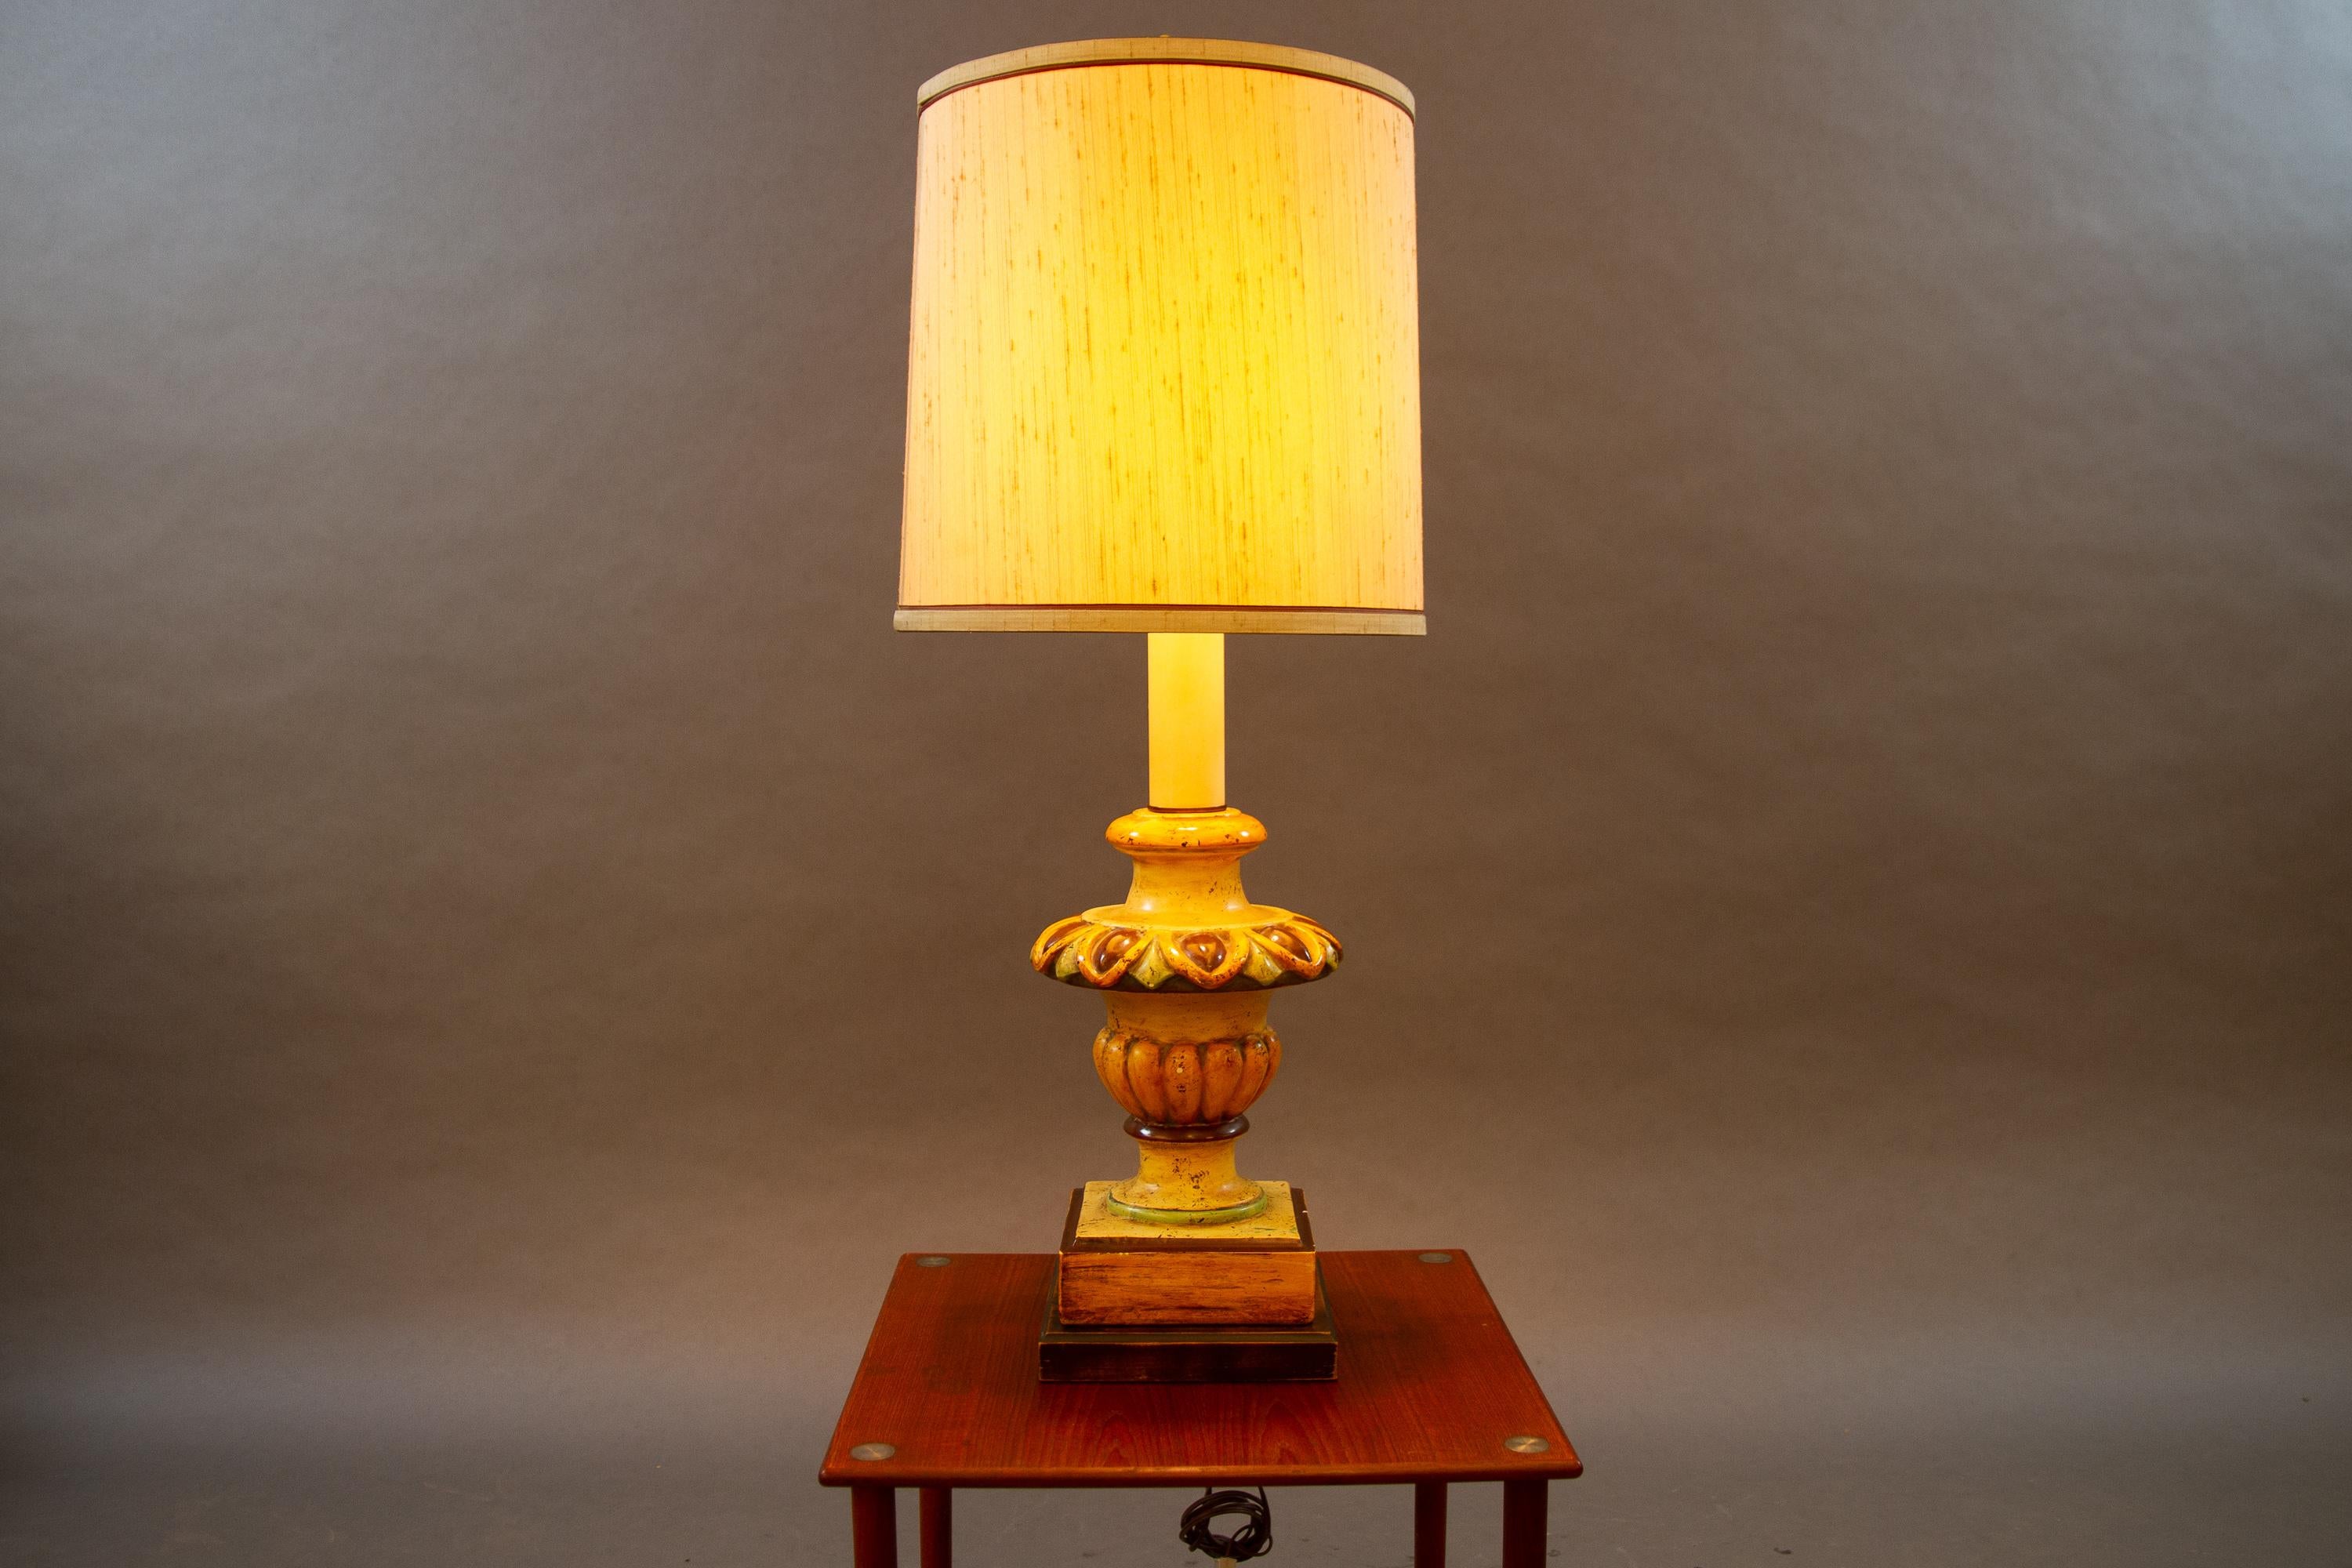 Vintage Frederick cooper table lamp, 1960s
Tall and colorful table lamp with large original shade.
Working order. Small nicks, please see photos.